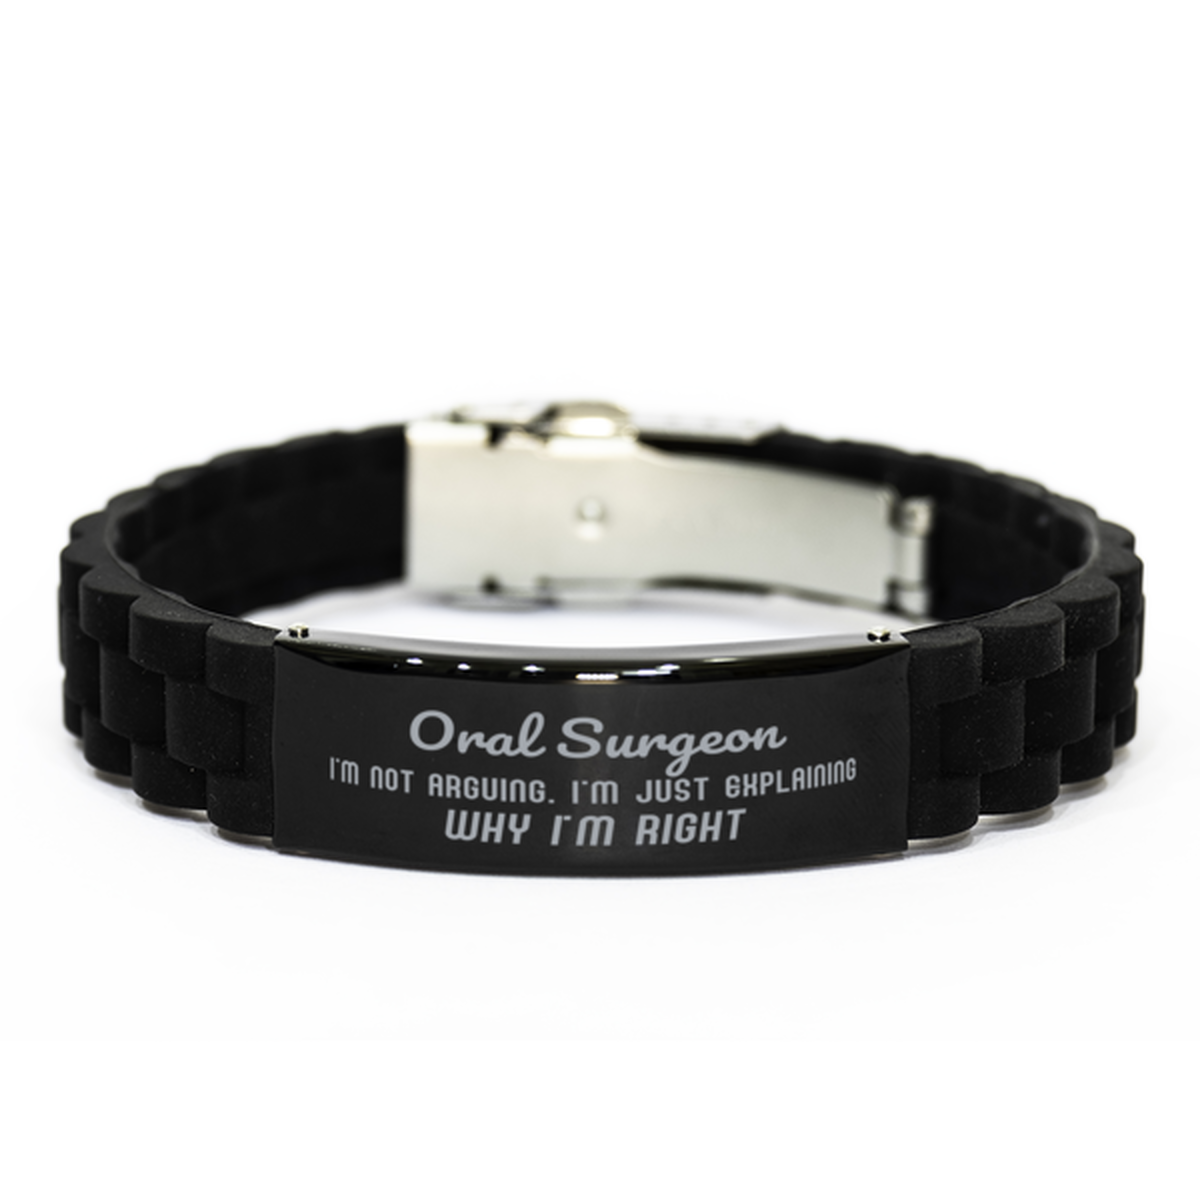 Oral Surgeon I'm not Arguing. I'm Just Explaining Why I'm RIGHT Black Glidelock Clasp Bracelet, Funny Saying Quote Oral Surgeon Gifts For Oral Surgeon Graduation Birthday Christmas Gifts for Men Women Coworker